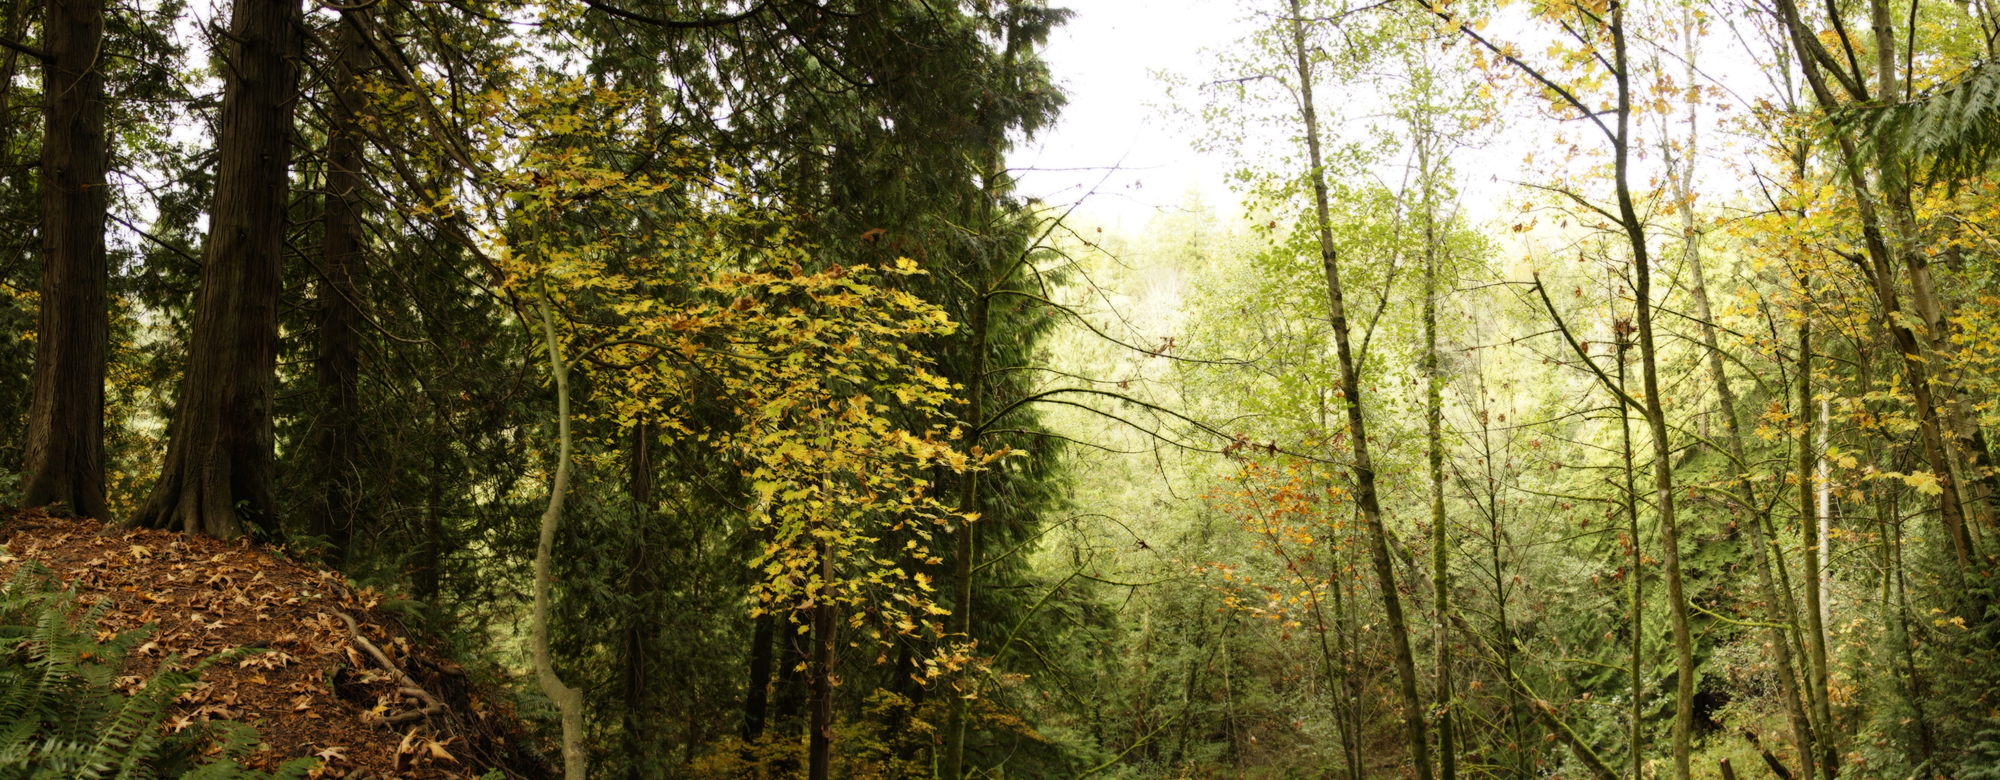 Autumn_Forests_013